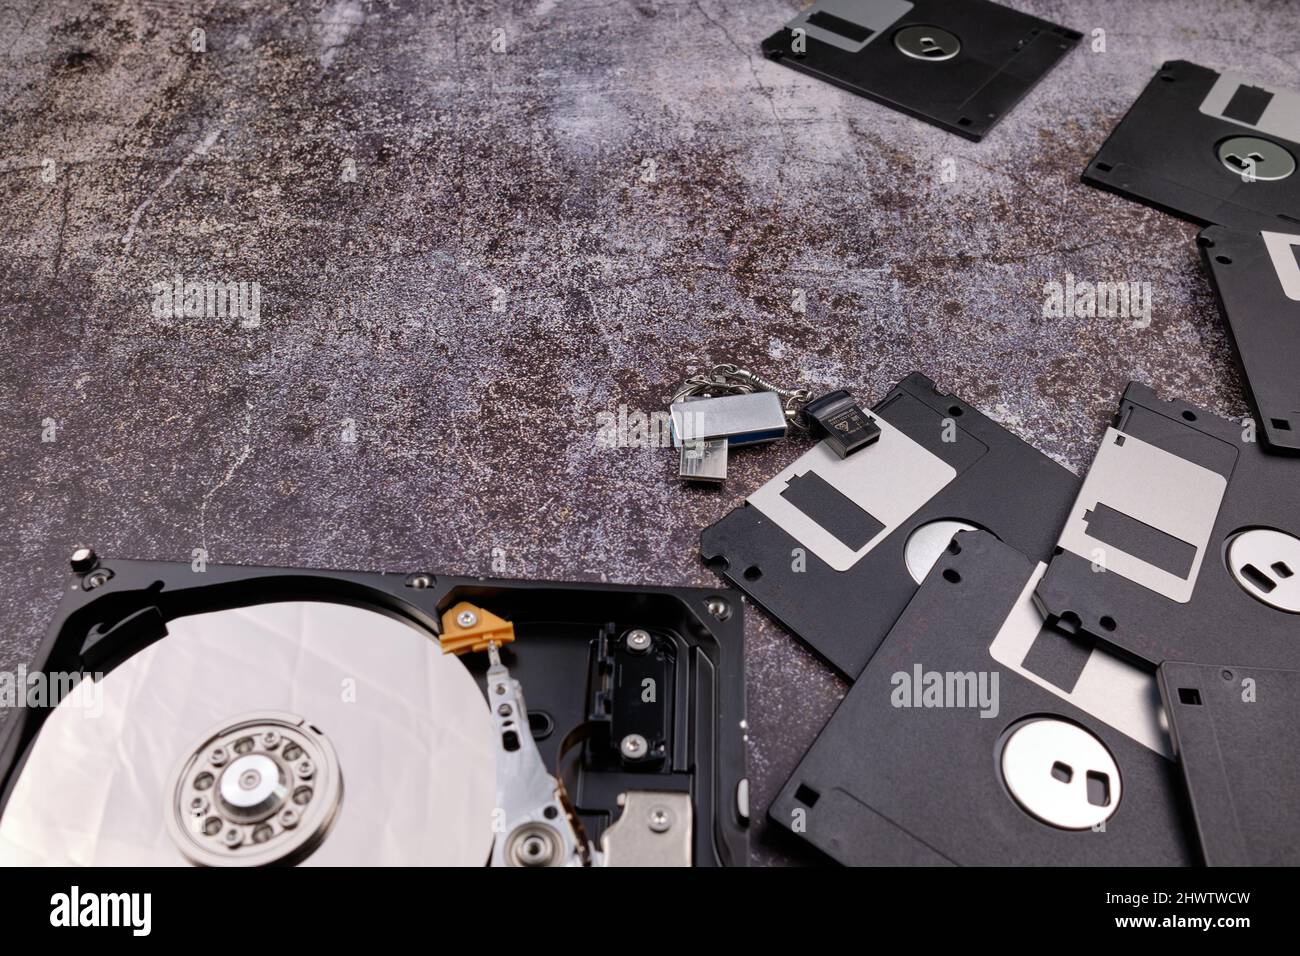 Technological background formed by different components of a computer on a table with a color similar to cement and with empty space. Stock Photo